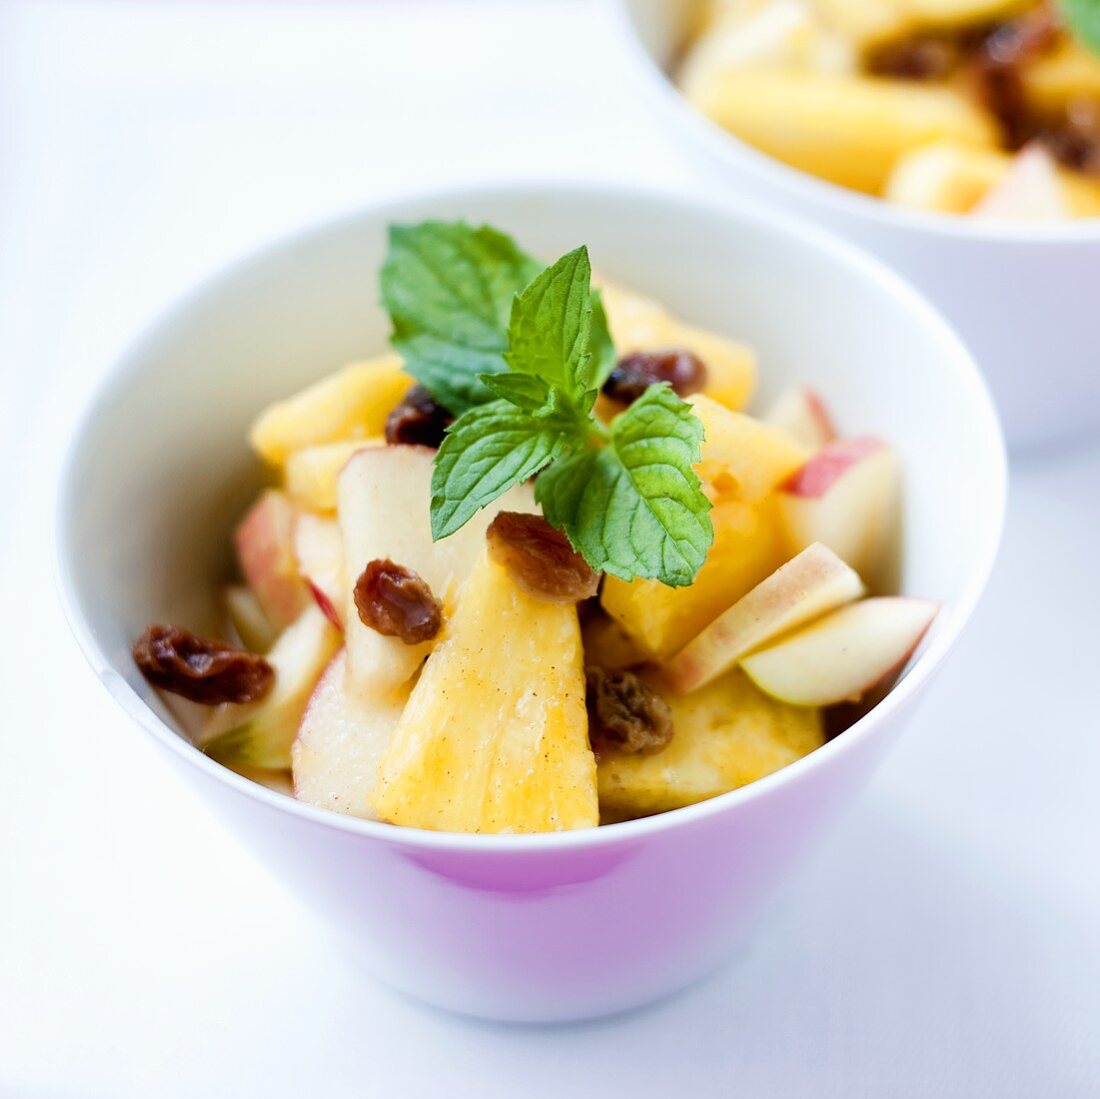 Fruit salad with raisins and mint